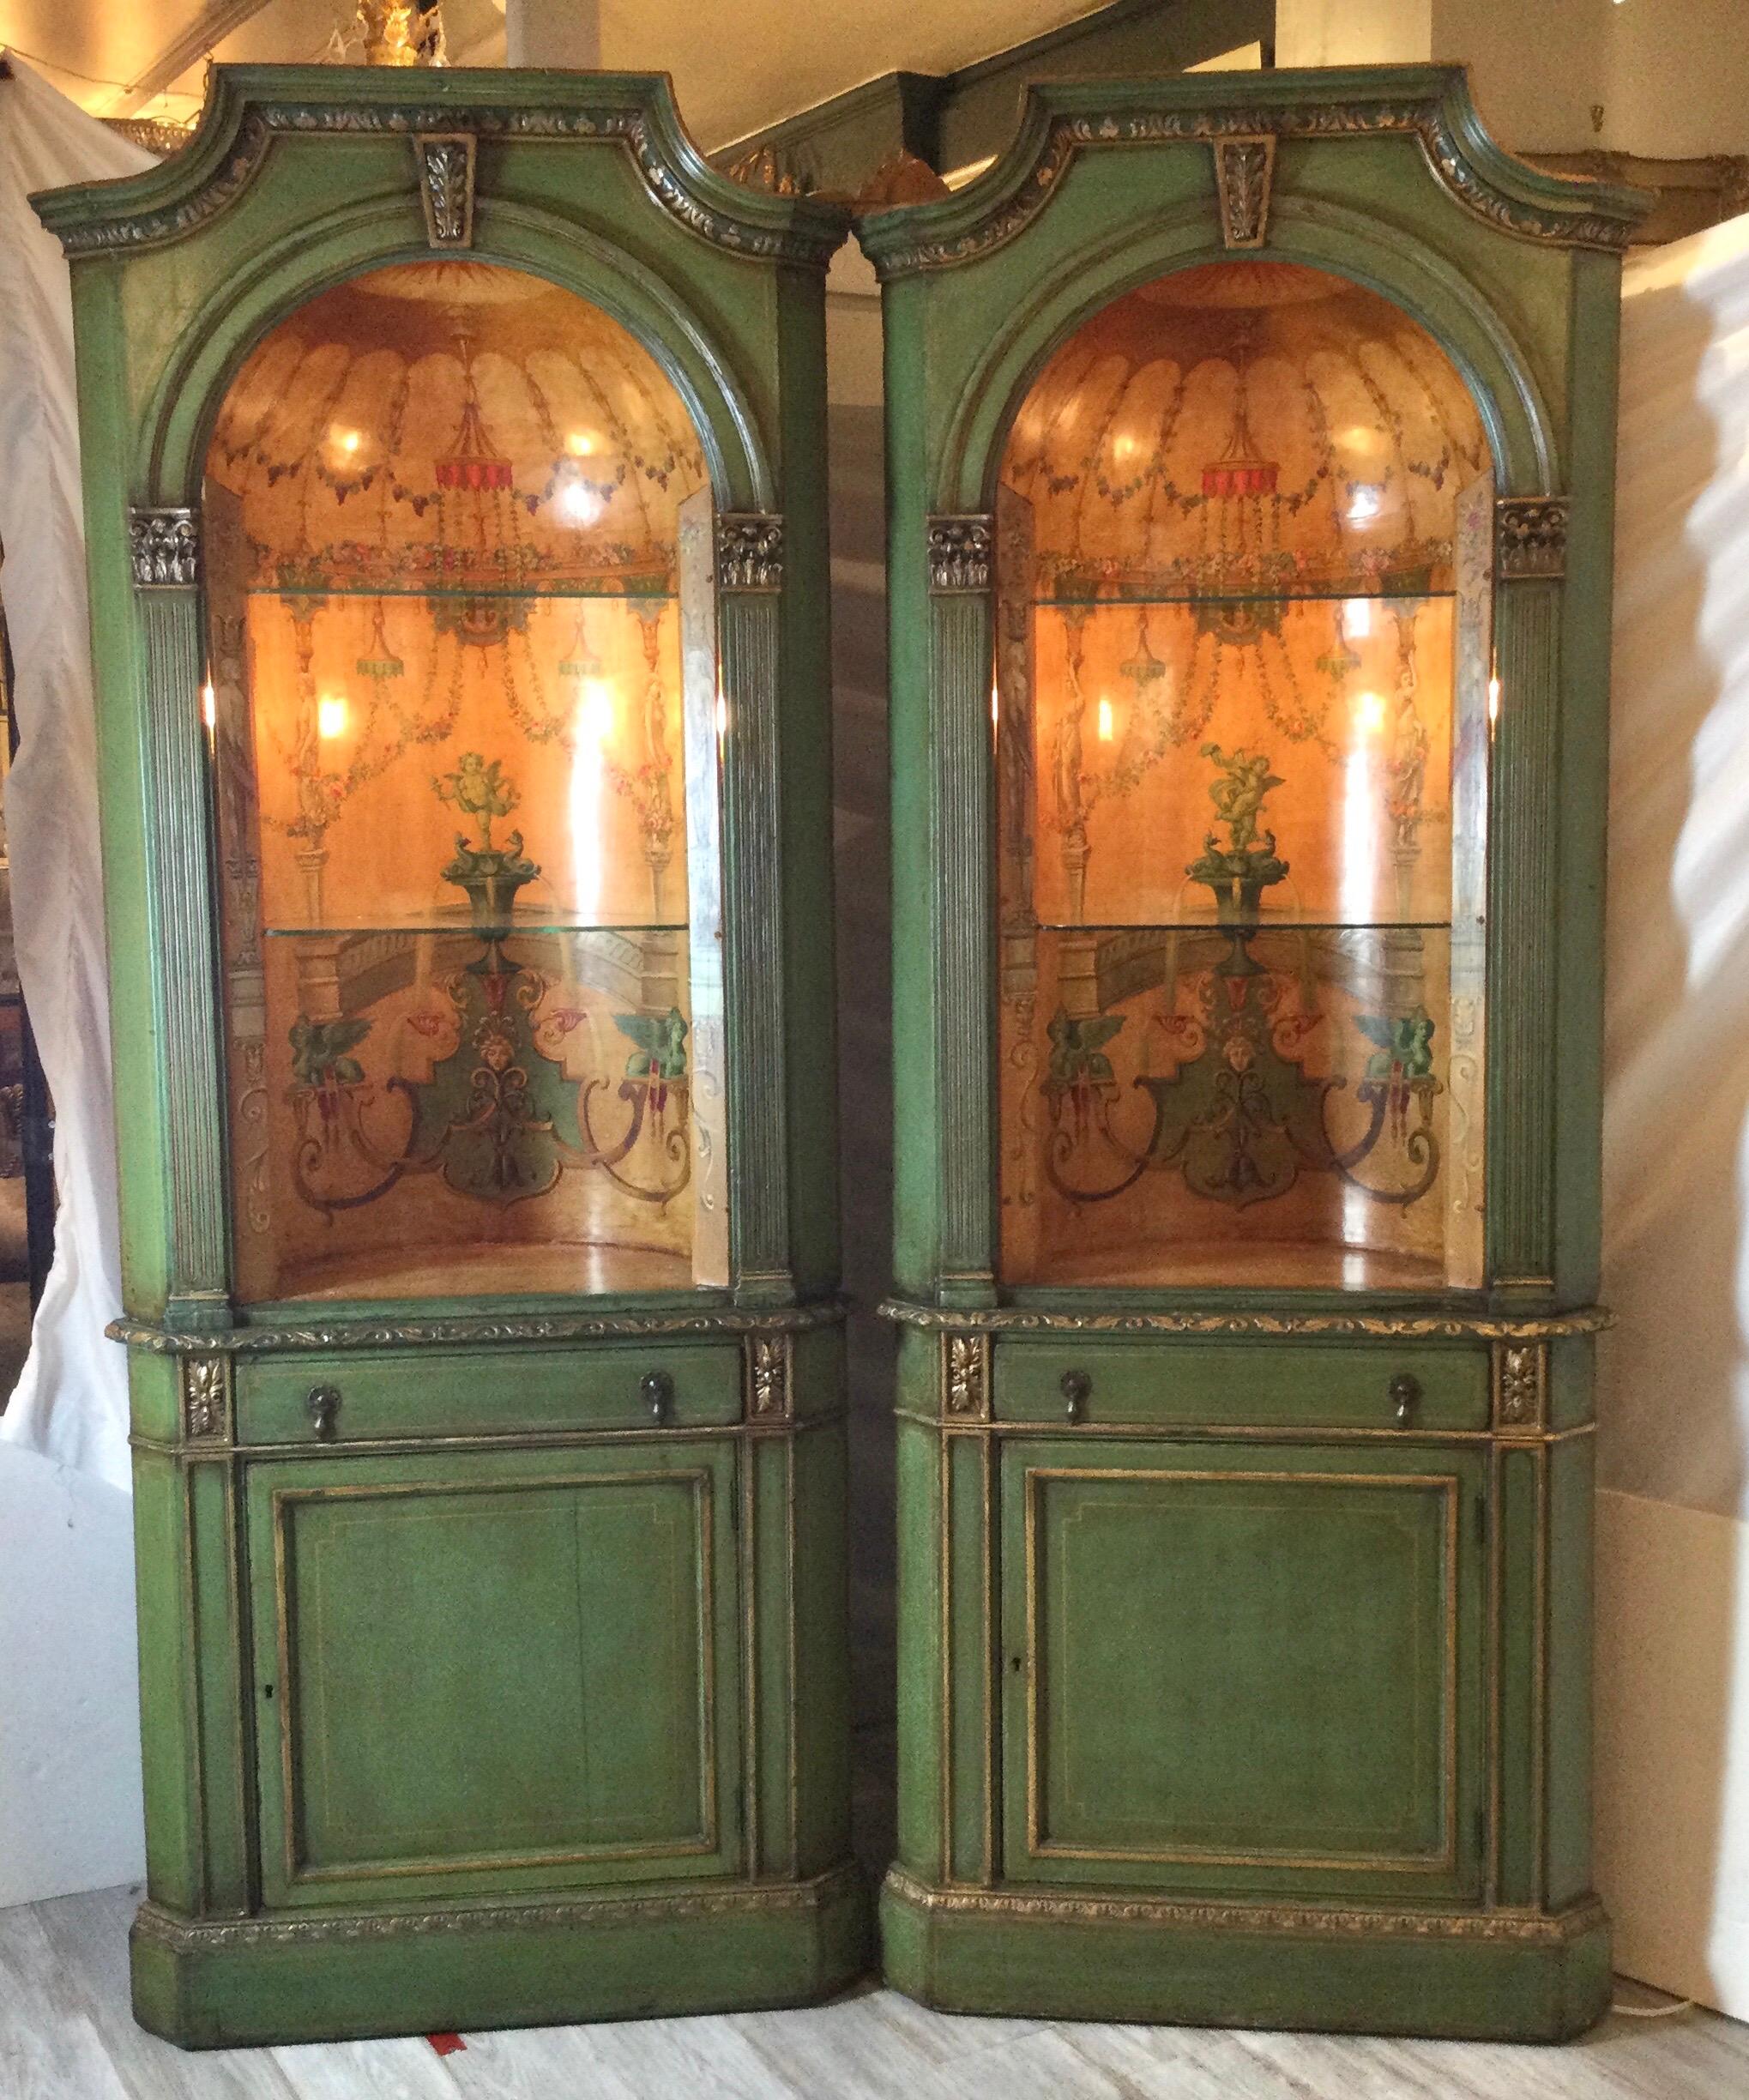 Wonderful pair of neo classical corner cabinets w/ hand painted curved interiors. The interiors have been professionally cleaned. Cabinets are green with gold trim. Domed interiors have removable glass shelfs. The cabinets are 2 parts. Each